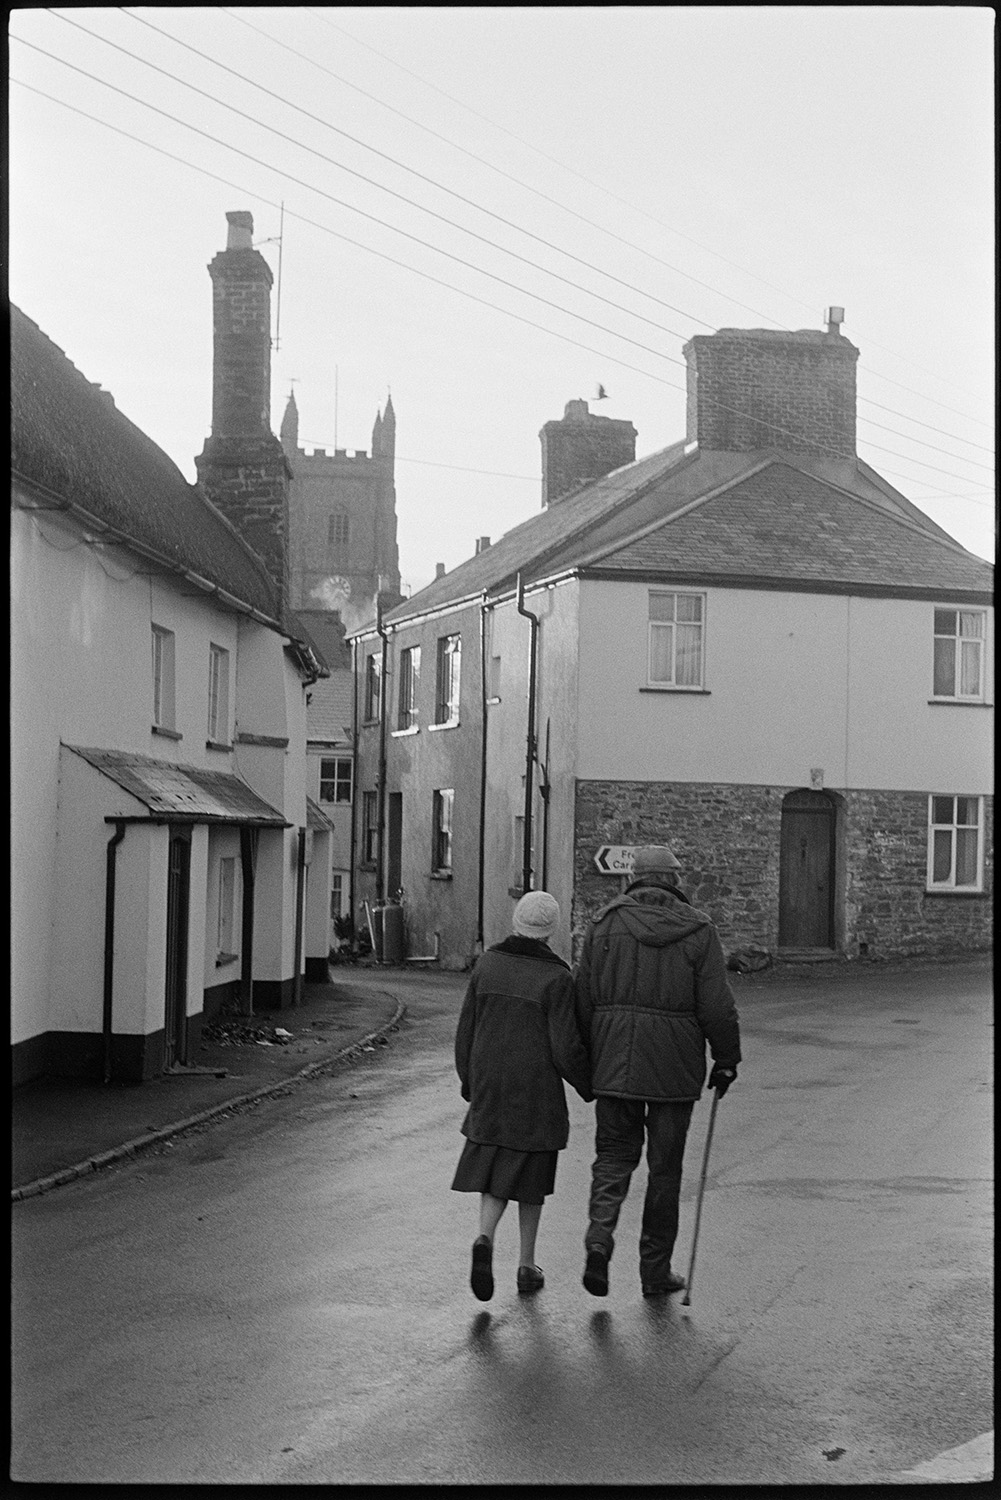 Street scenes. 
[A man and woman walking along a street in Chulmleigh holding hands. The man is using a walking stick. They are walking past houses. The church tower can be seen in the background.]